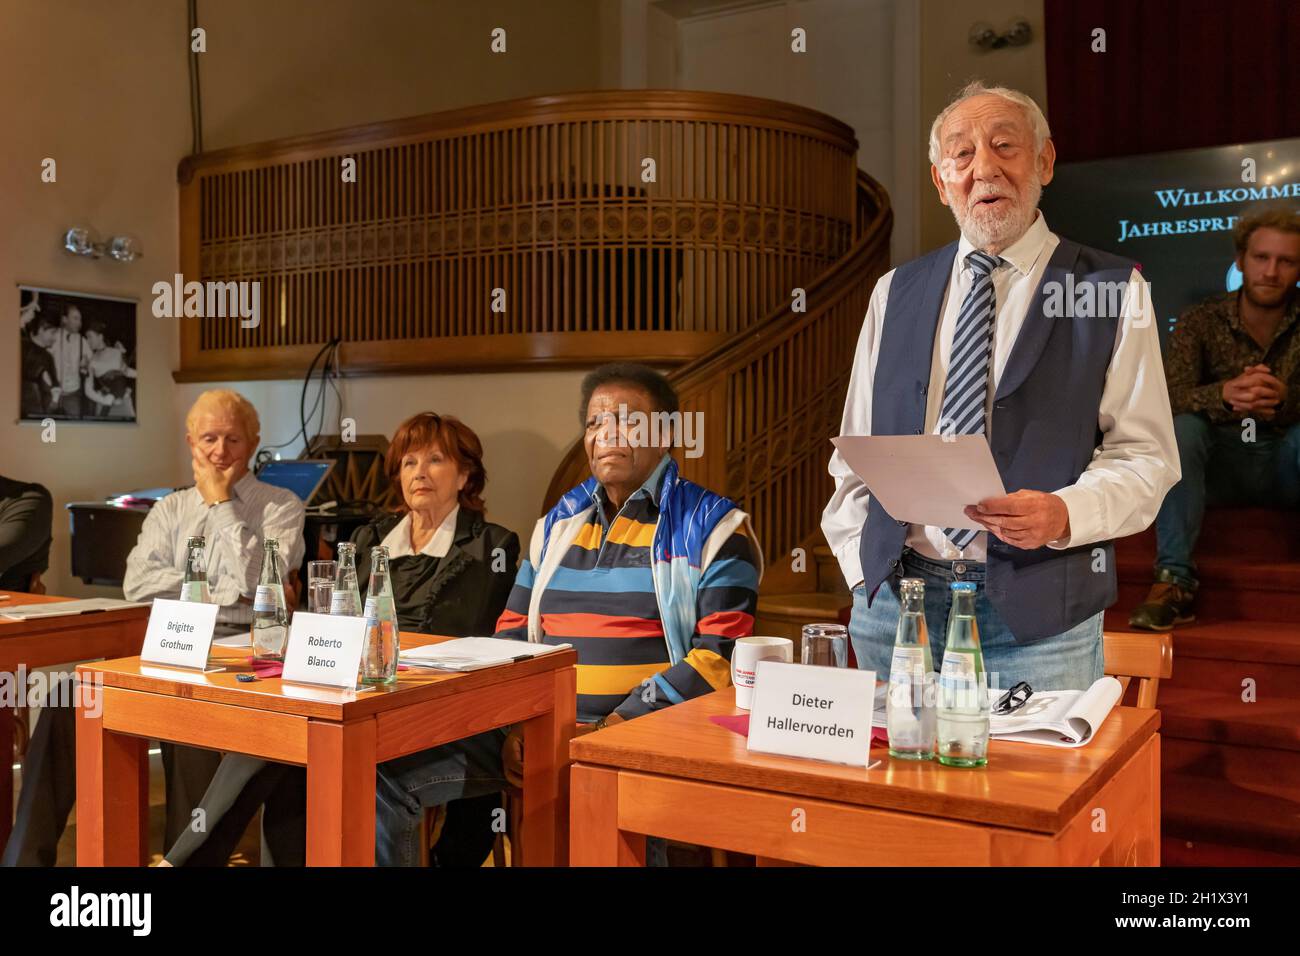 Peter Bause, Brigitte Grothum, Roberto Blanco, Dieter Hallervorden at the annual press conference at the Schlosspark Theater in Berlin. Stock Photo